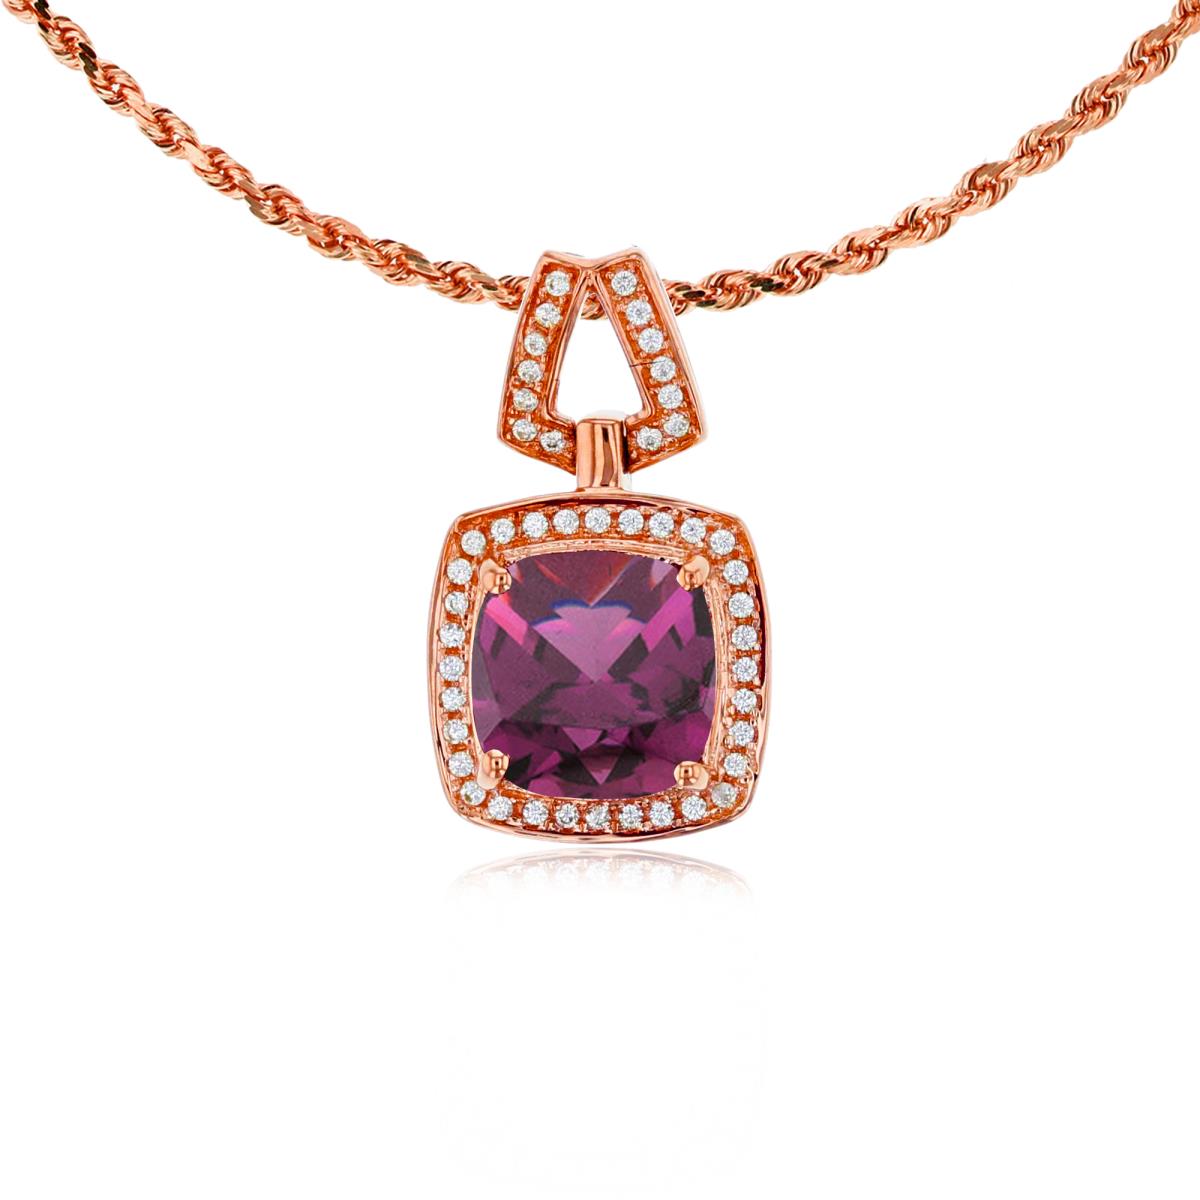 10K Rose Gold 7mm Cushion Rhodolite & 0.10 CTTW Diamond Halo 18" Rope Chain Necklace